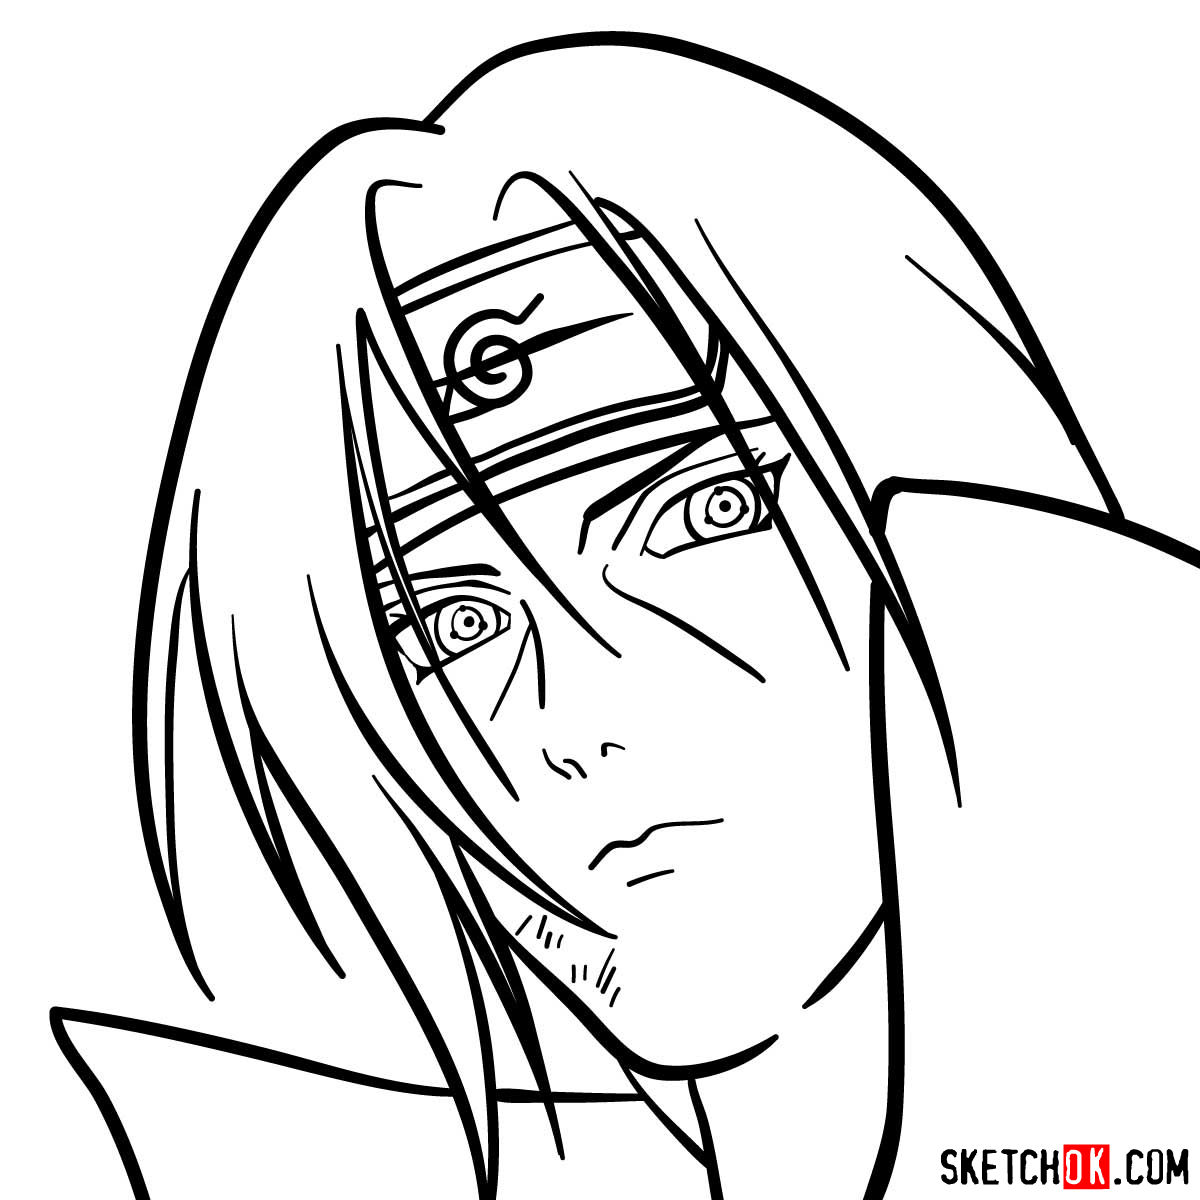 How to draw Itachi's face (Naruto anime) Sketchok easy drawing guides